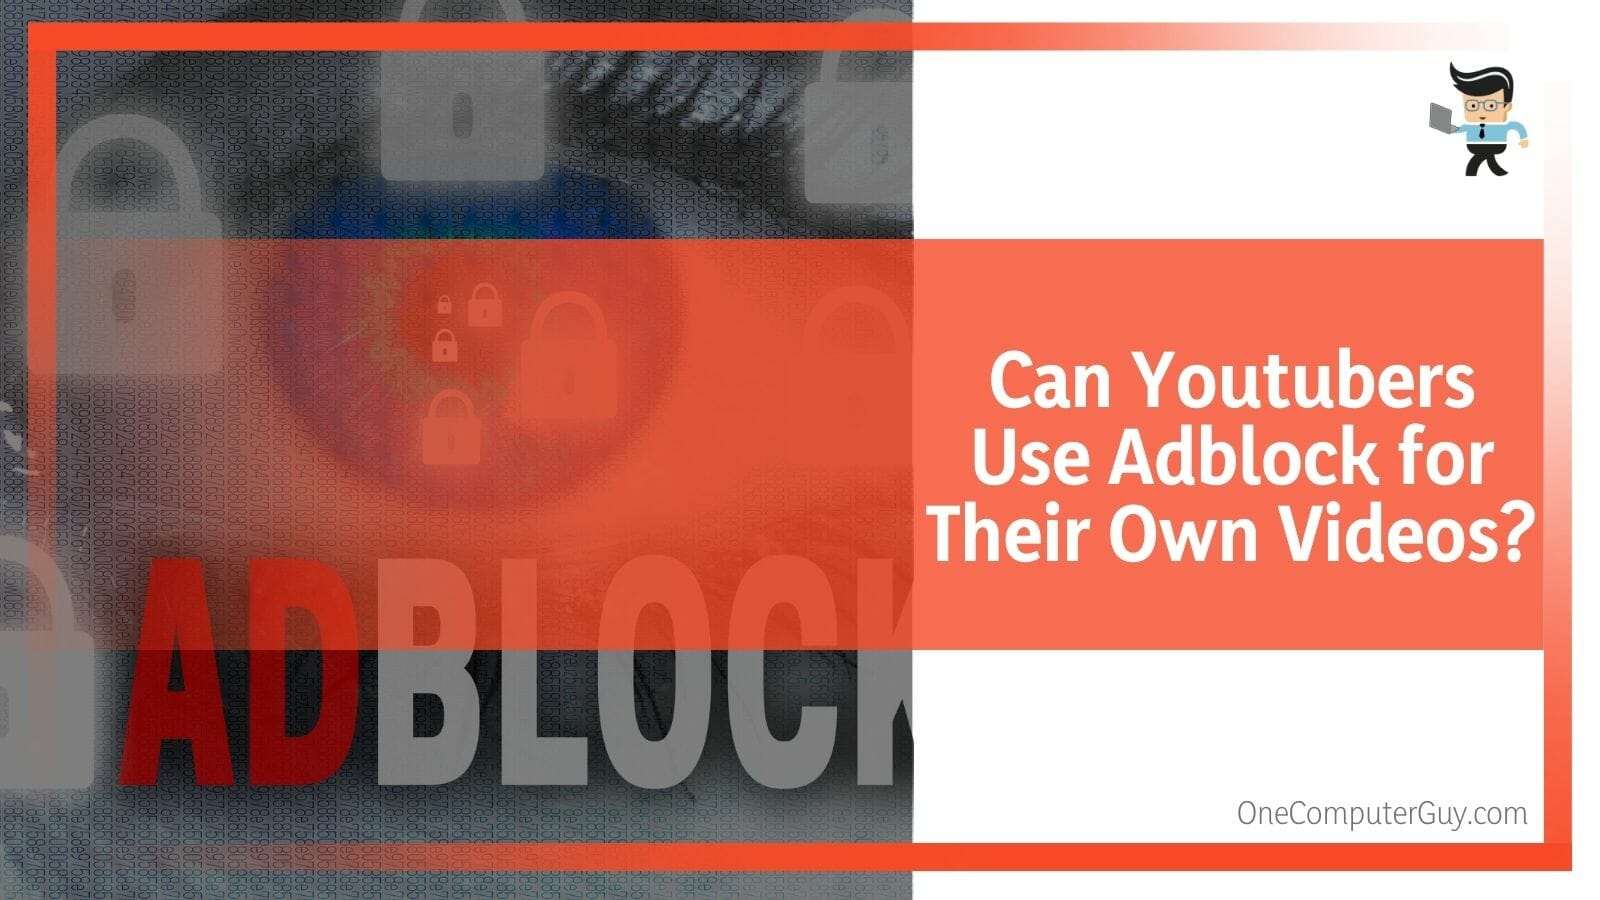 Can Youtubers Use Adblock for Their Own Videos